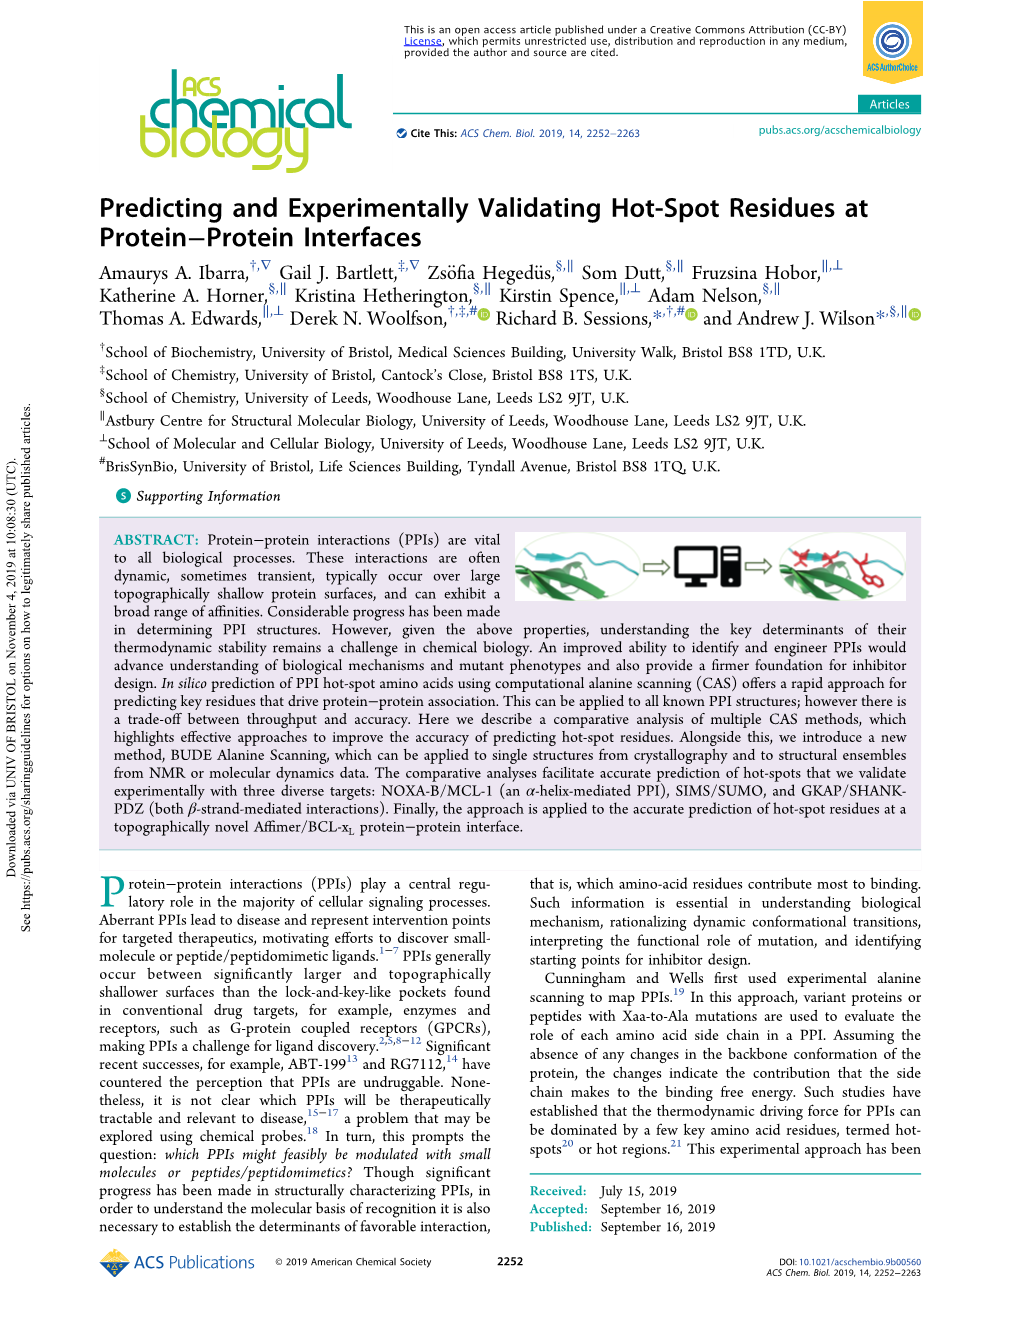 Predicting and Experimentally Validating Hot-Spot Residues at Protein−Protein Interfaces † ∇ ‡ ∇ § ∥ § ∥ ∥ ⊥ Amaurys A